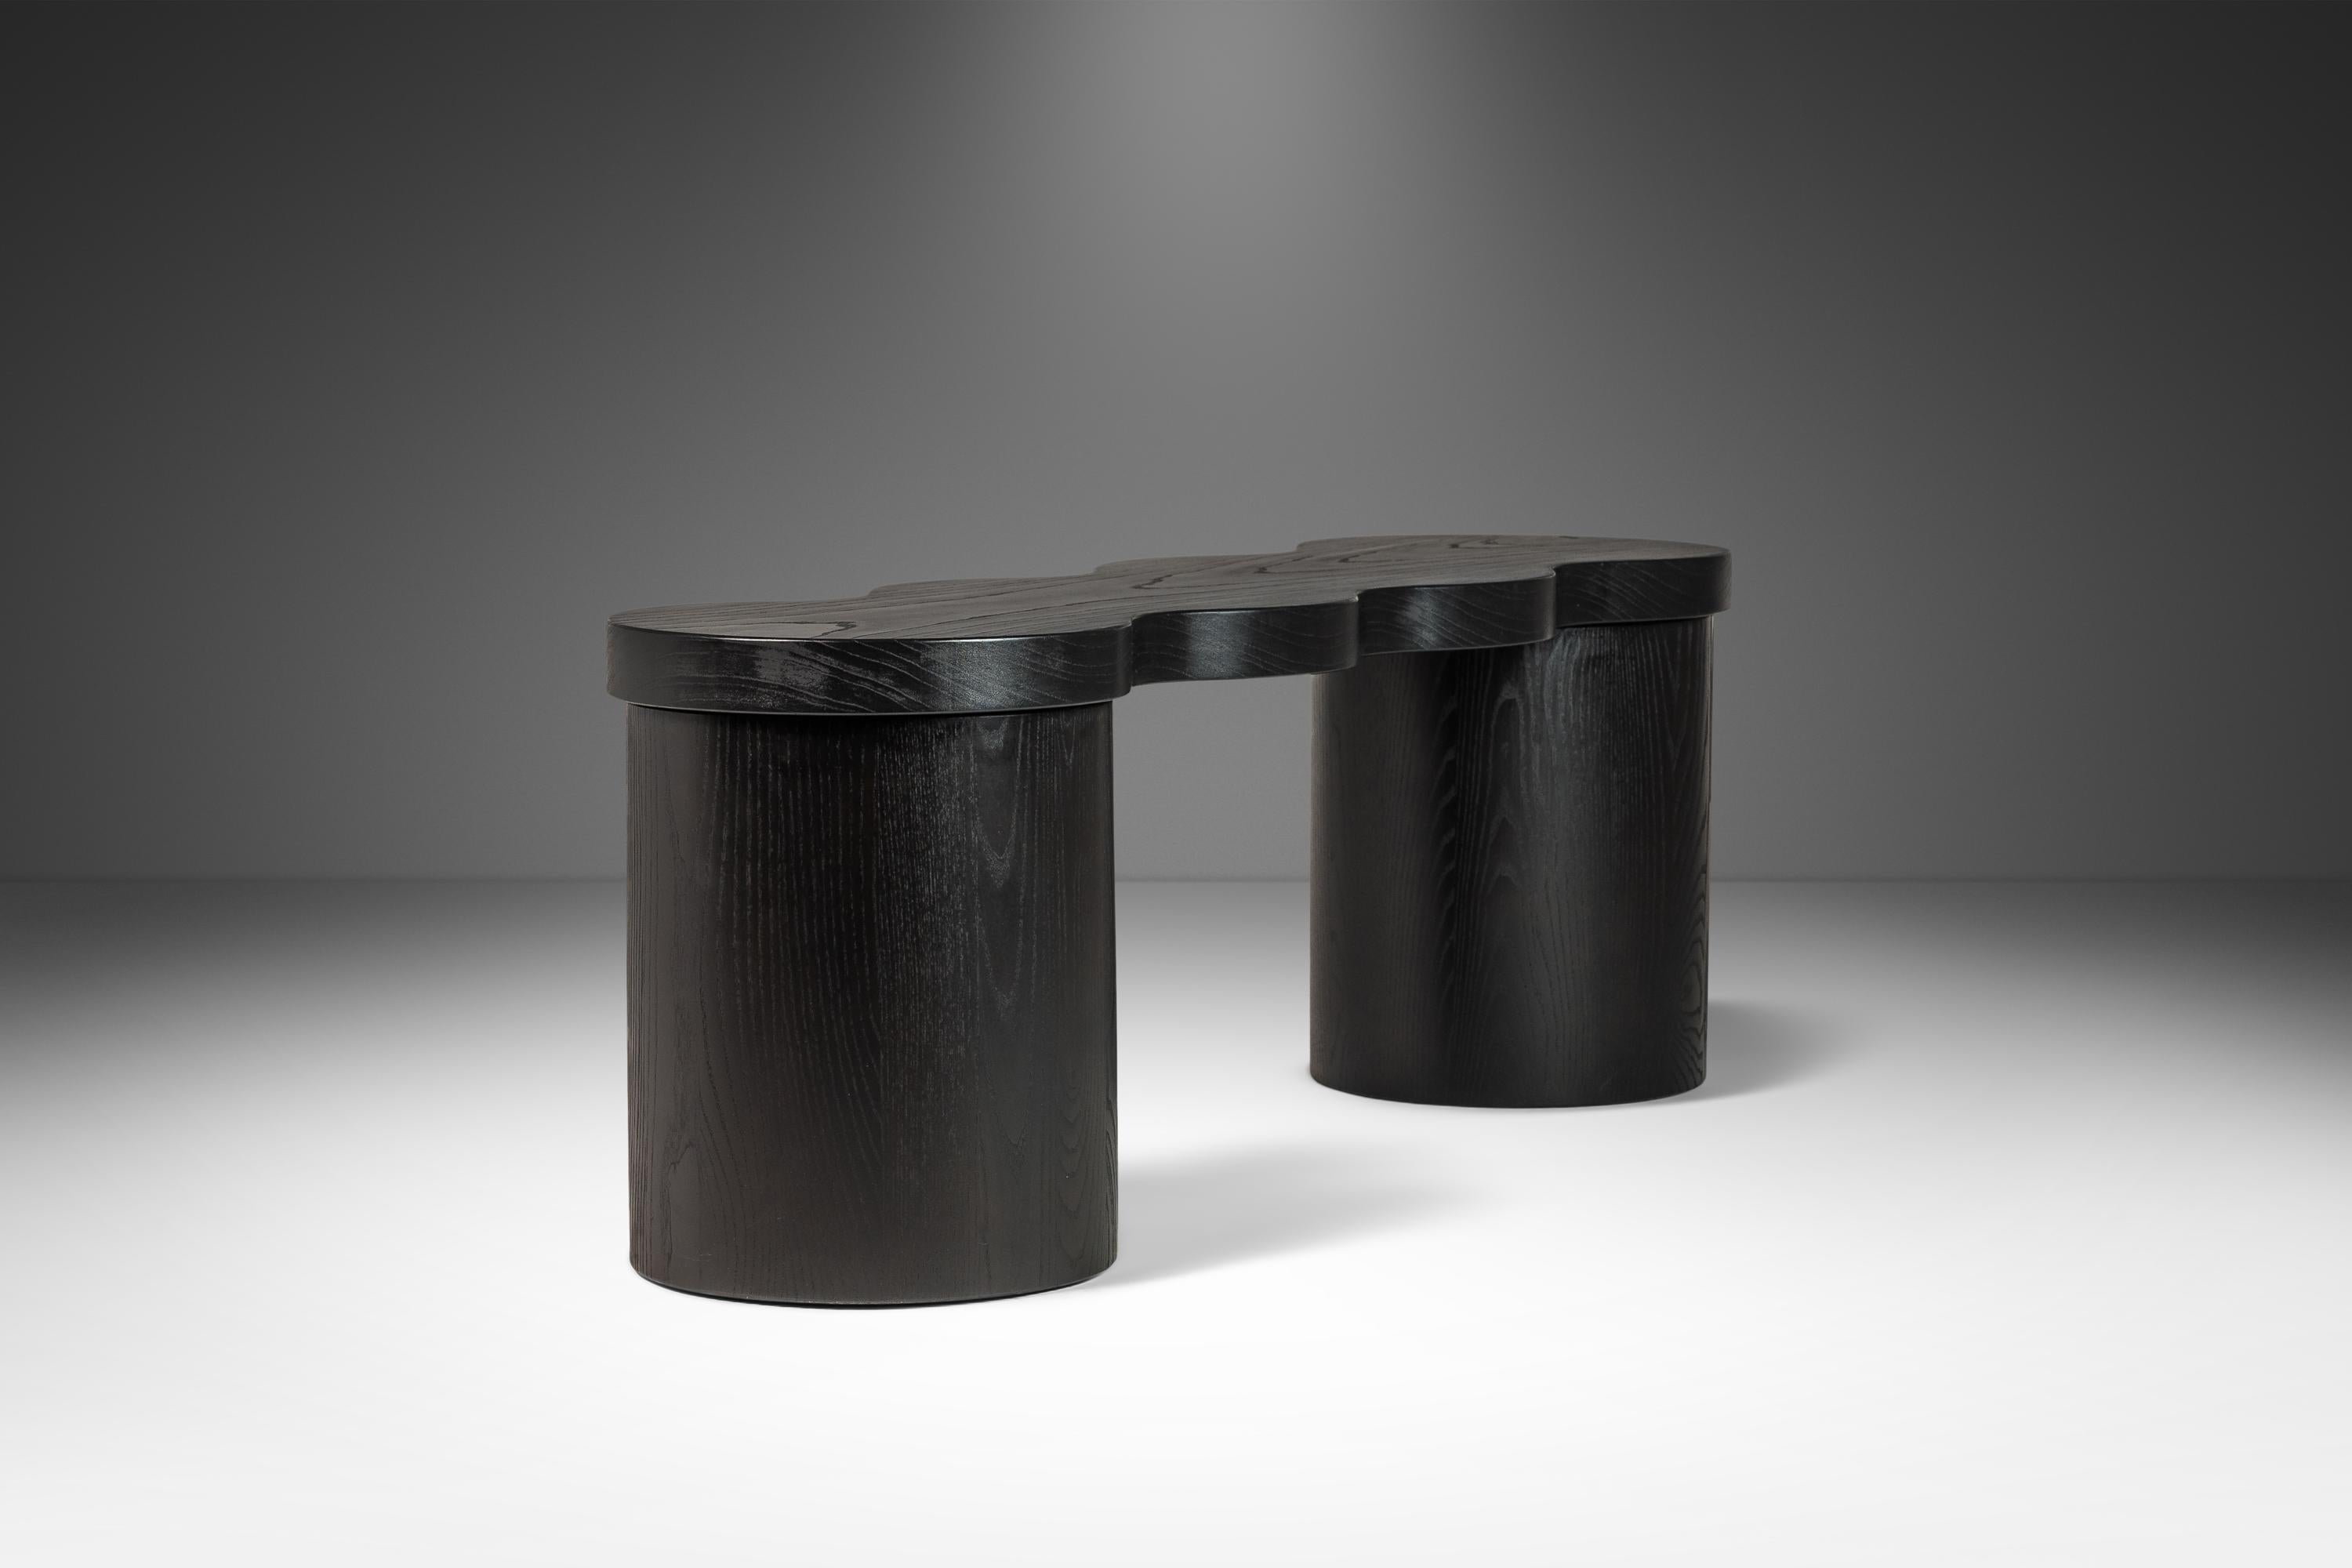 Organic Modern Hand-Turned Sculptural Bench in Solid Ebonized Ash by Mark Leblanc, c. 2000s For Sale